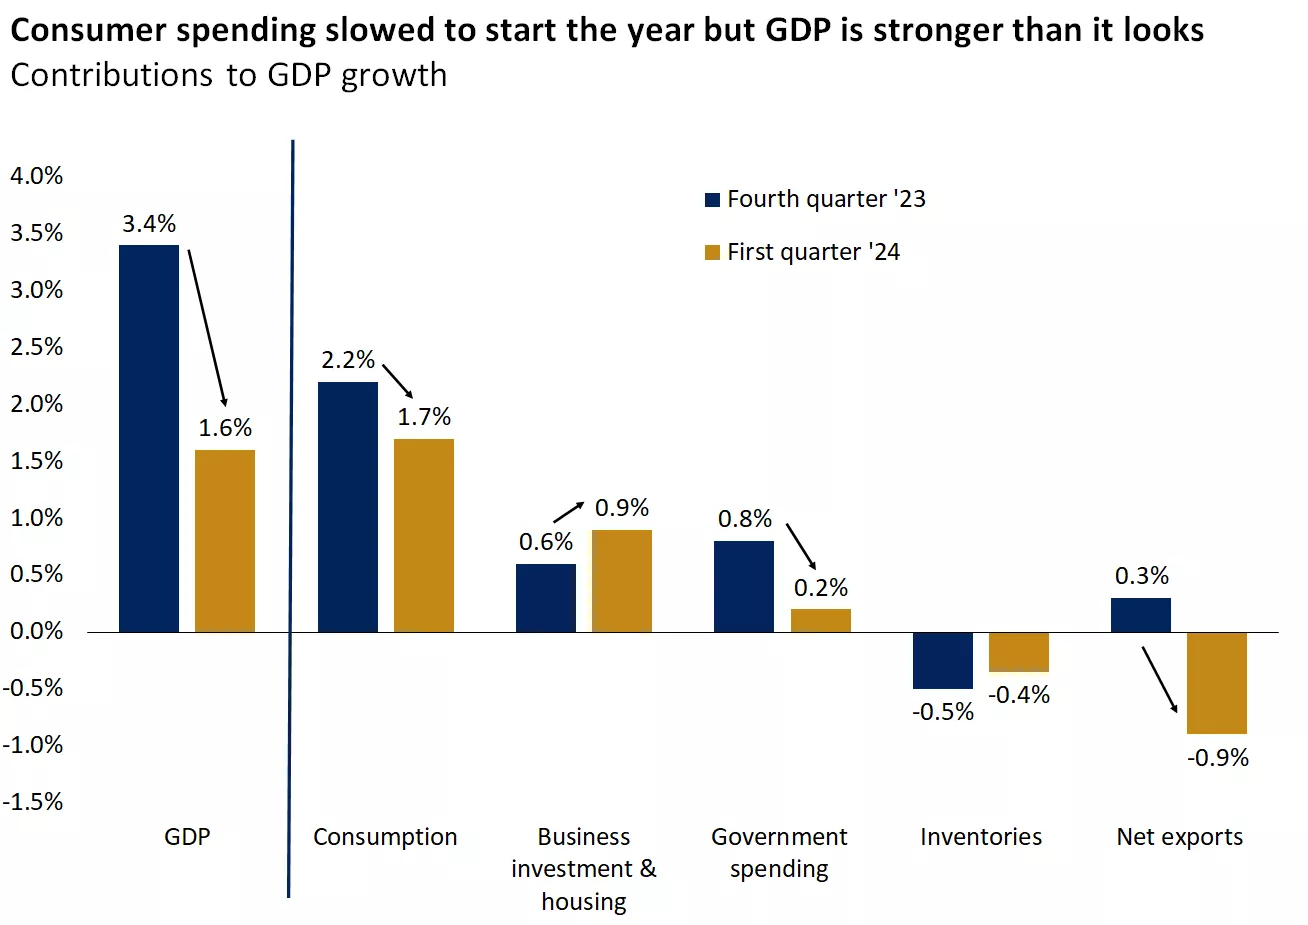  Chart showing consumer spending slowed to start the year but GDP is stronger than it looks
